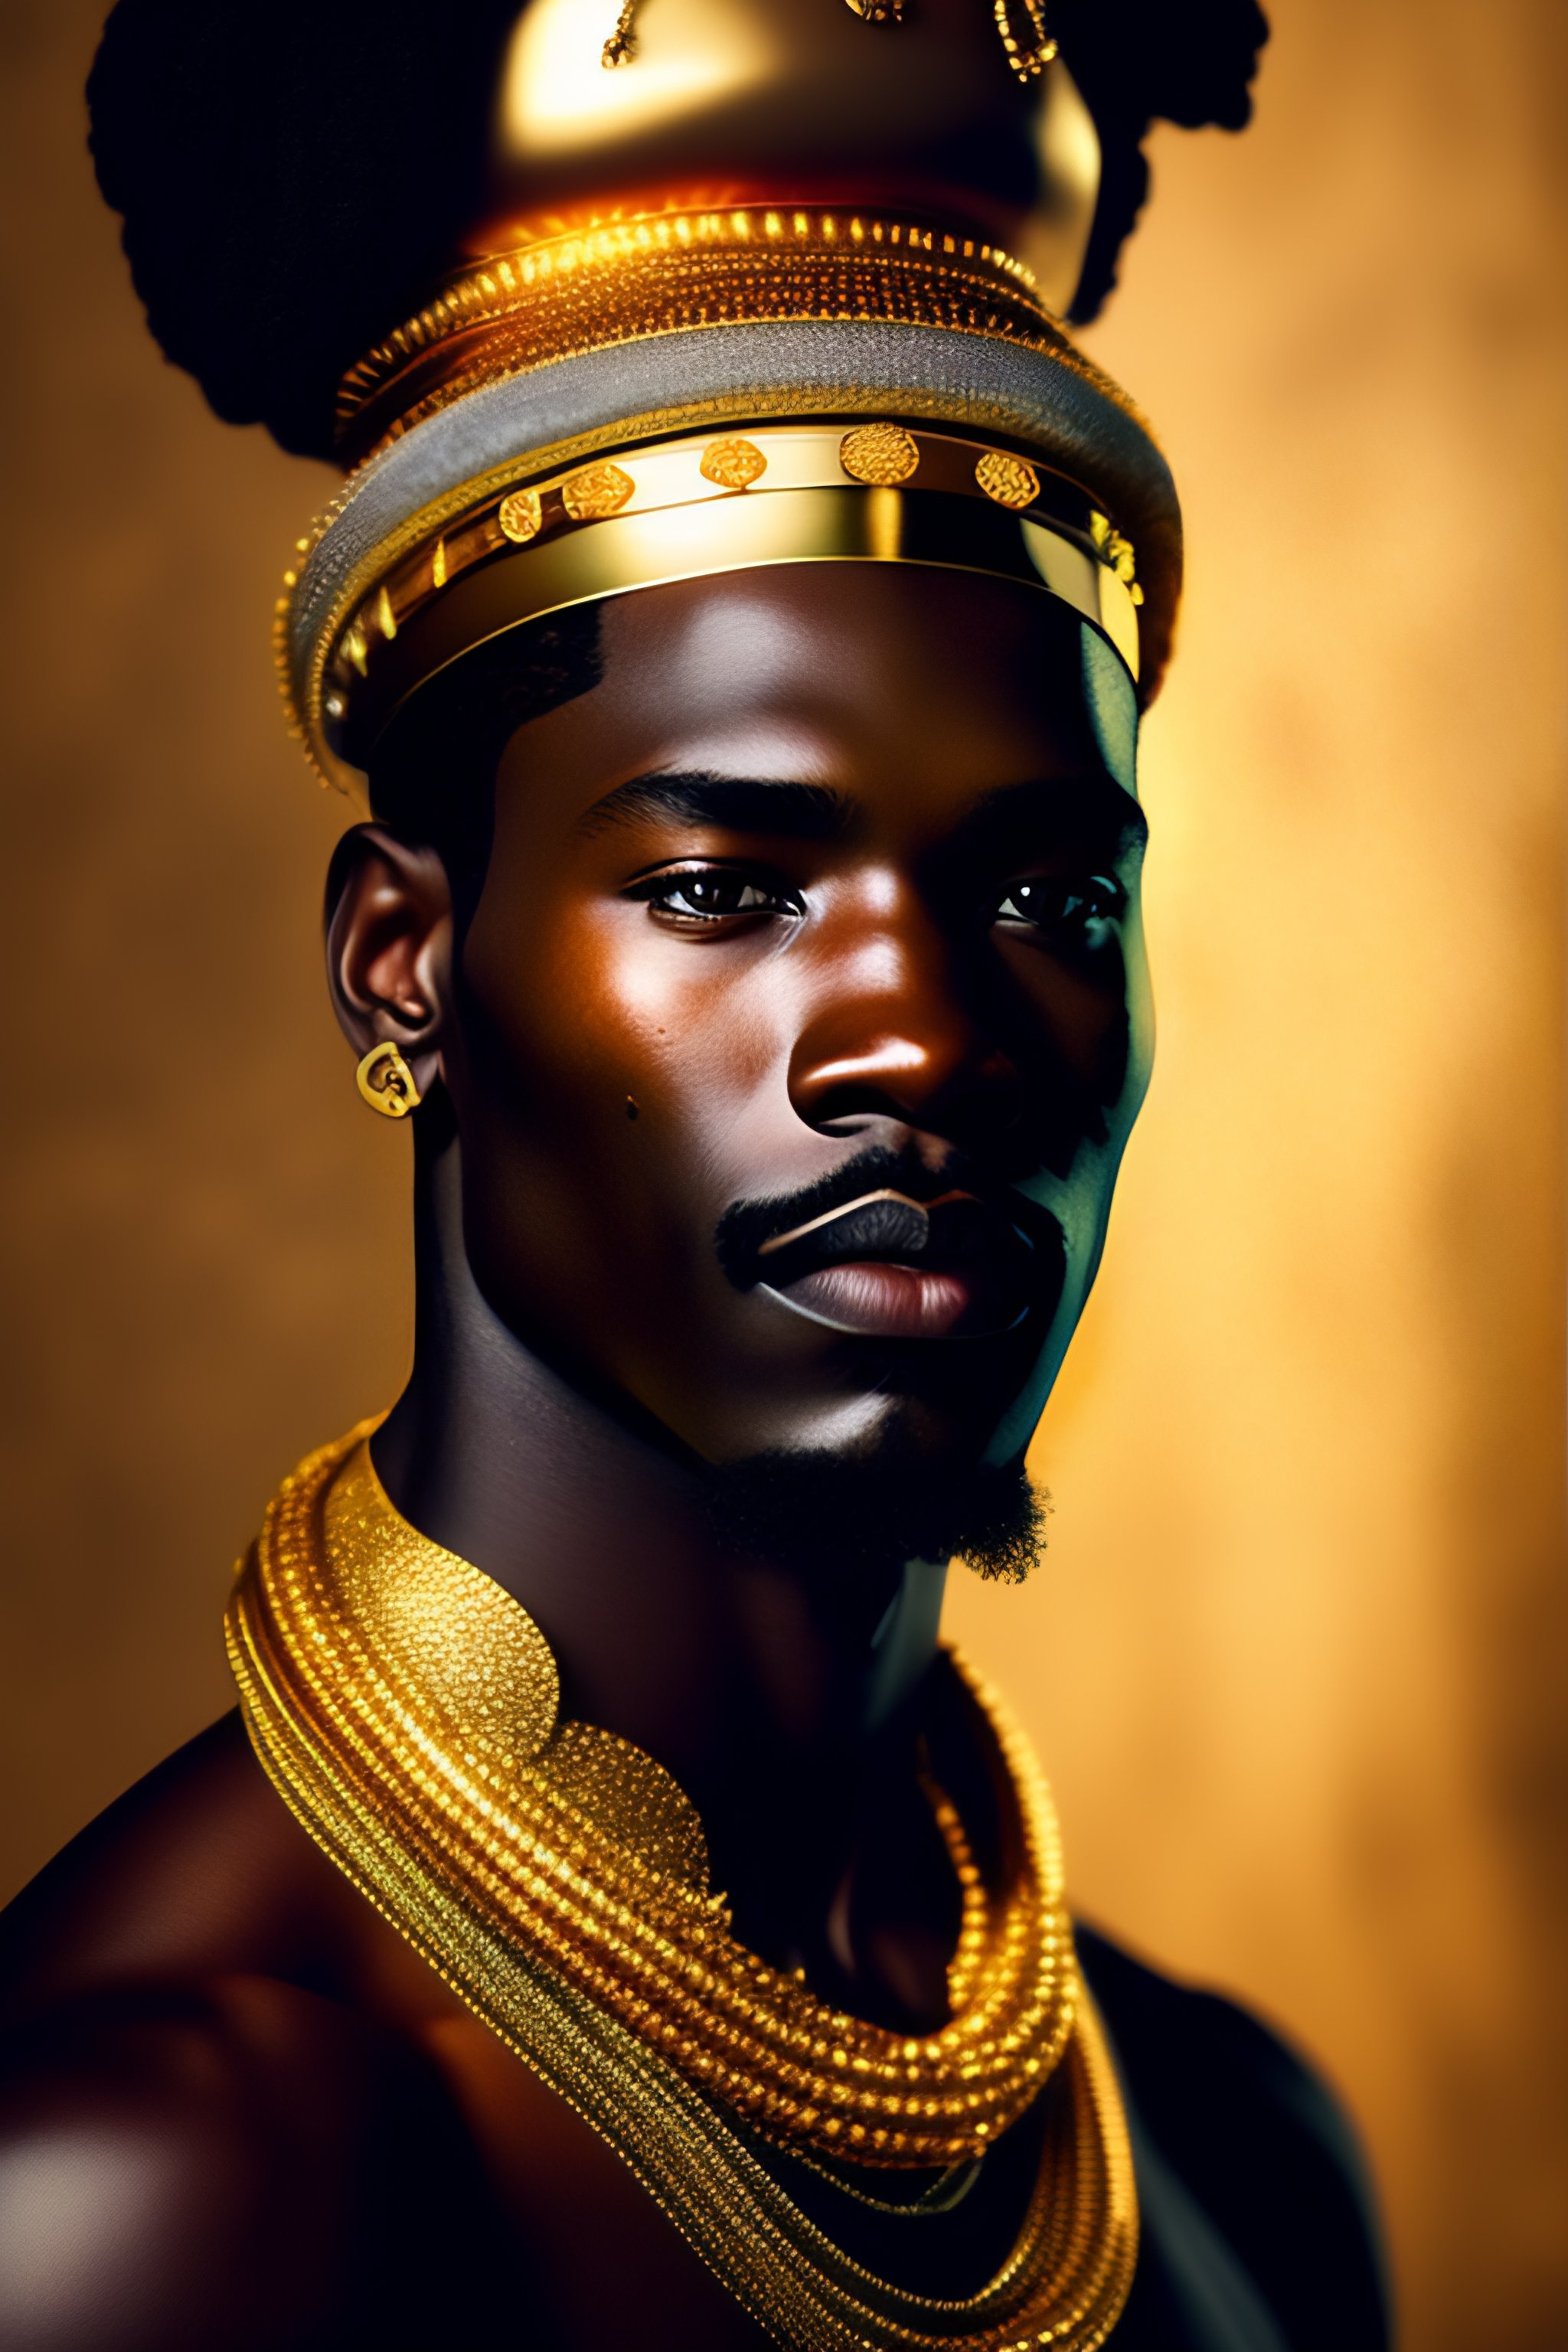 Lexica - African King, wearing gold ornaments, looking into camera ...